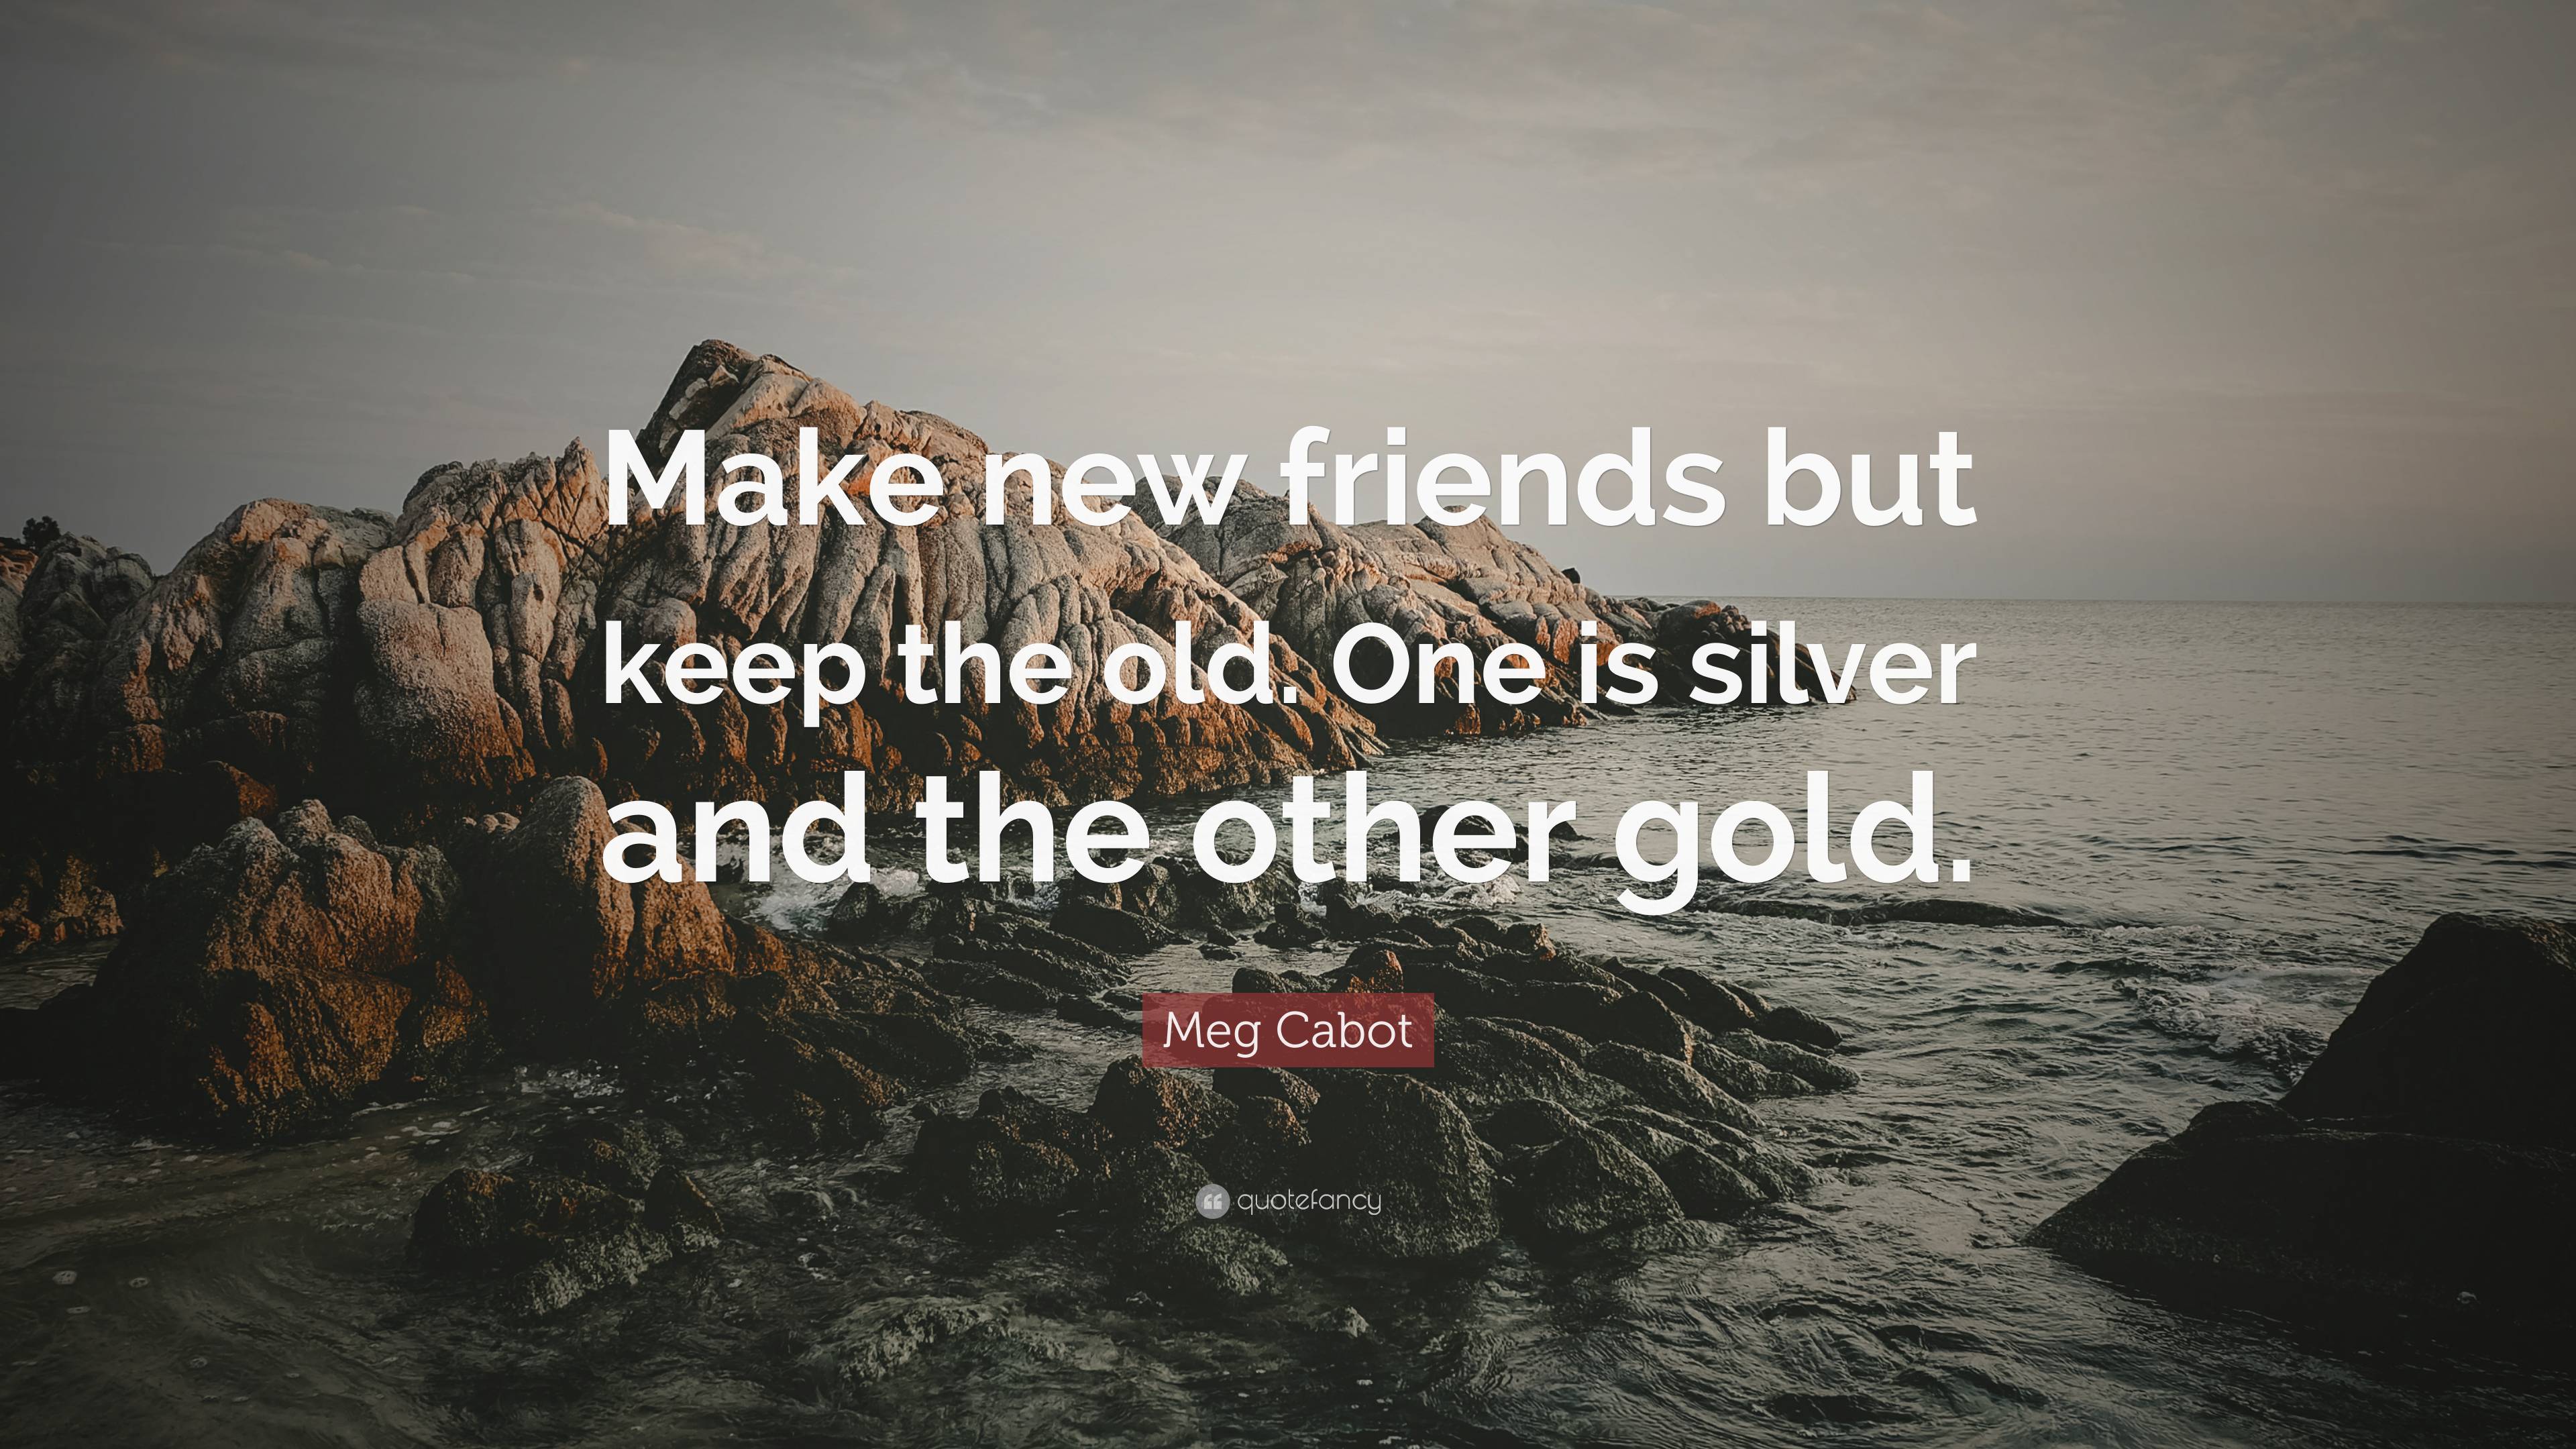 Meg Cabot Quote “make New Friends But Keep The Old One Is Silver And